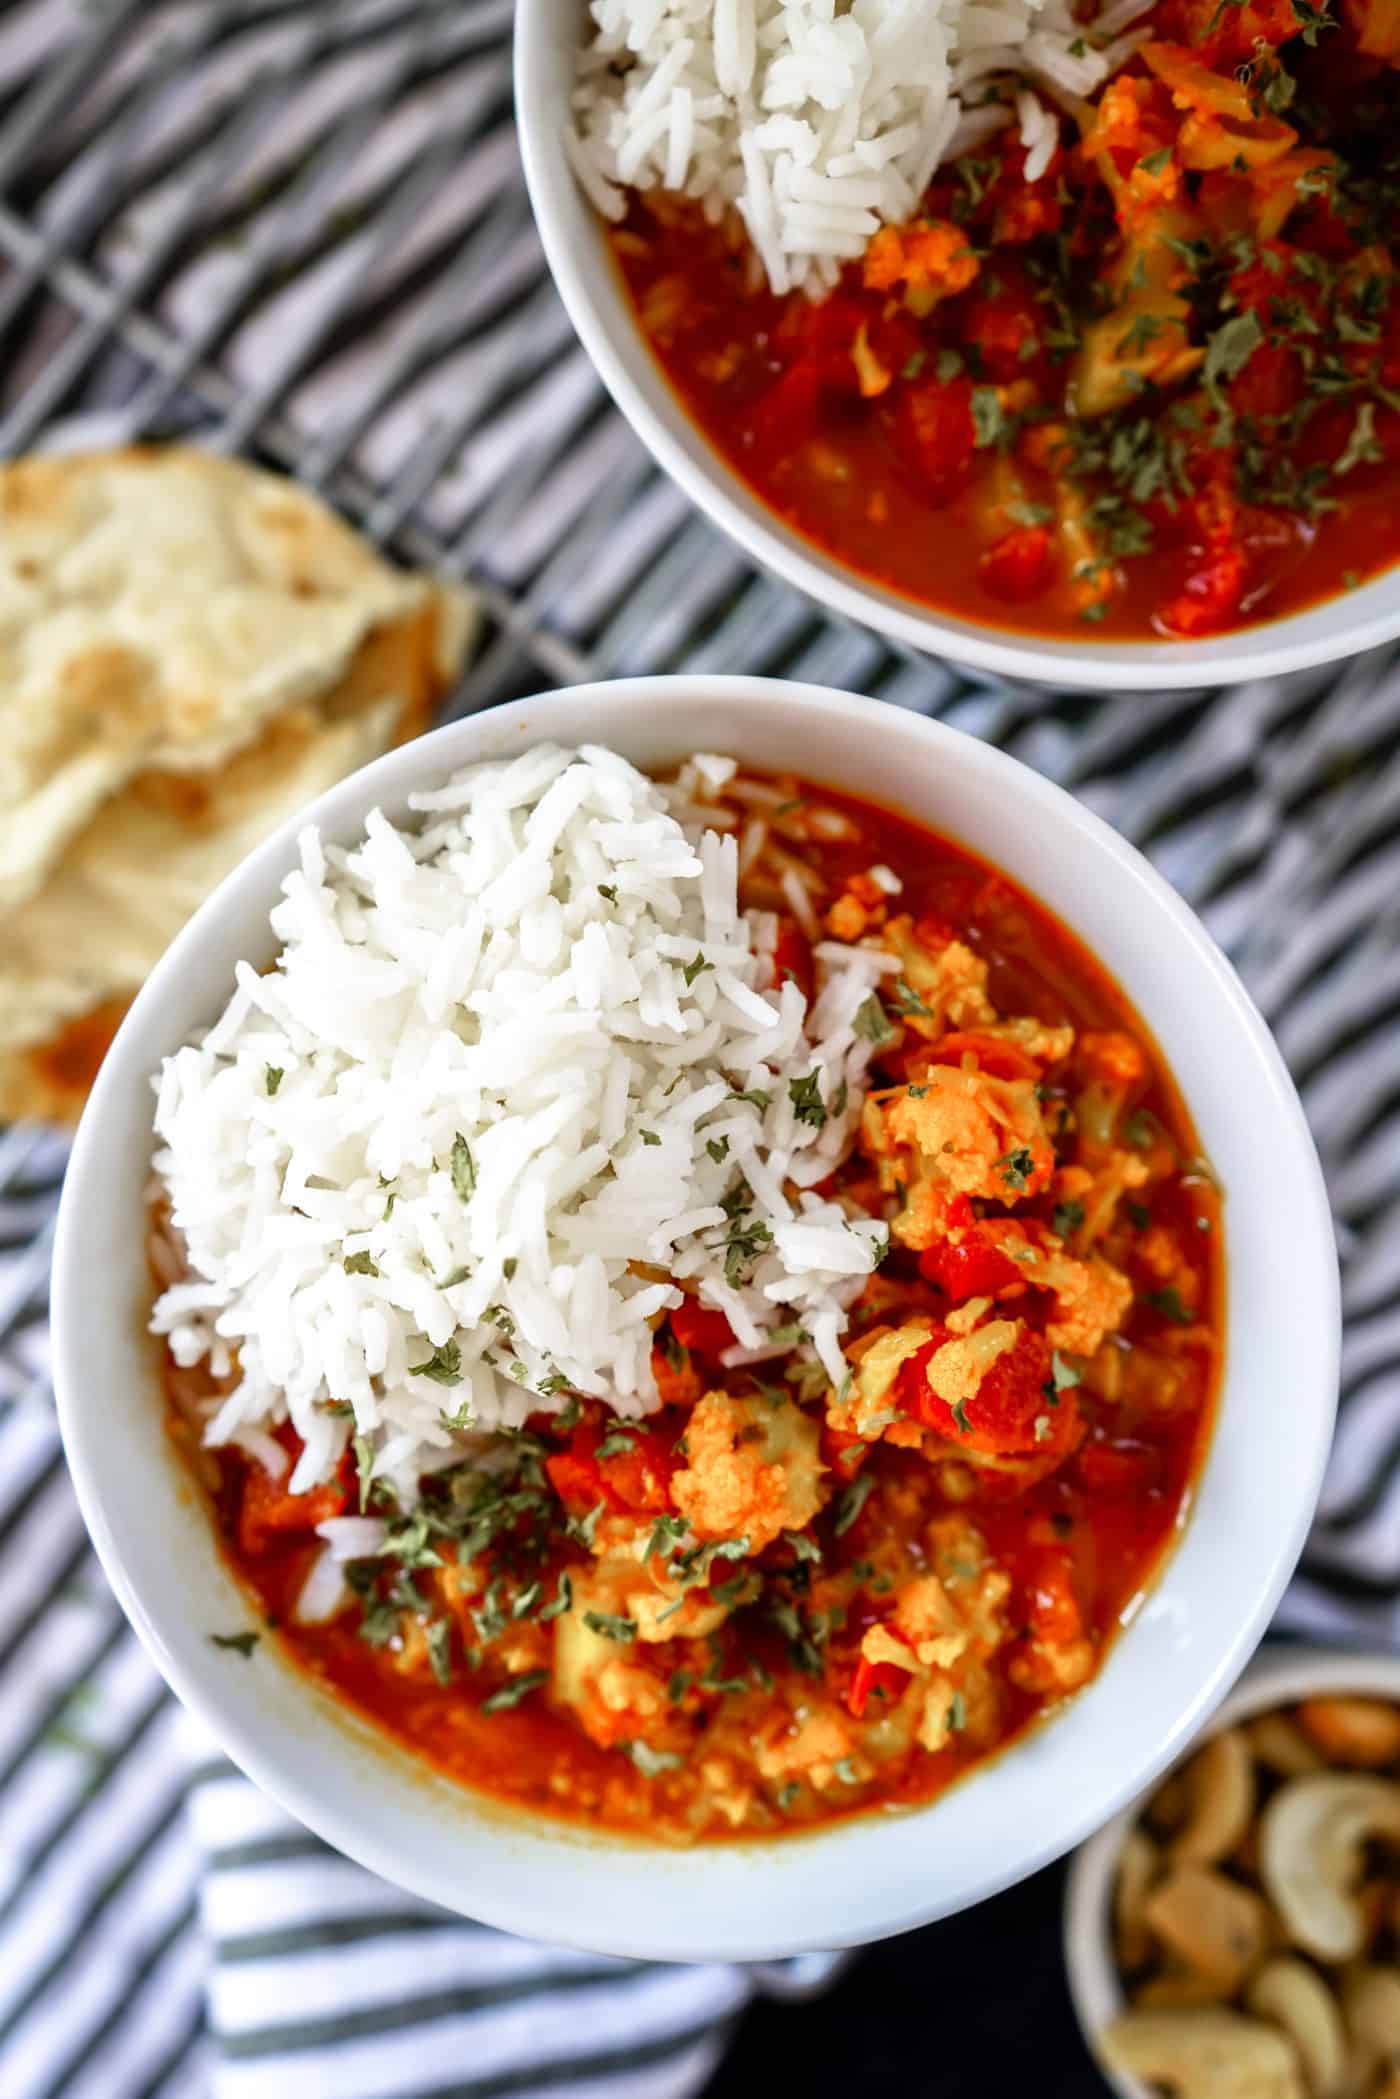 A Lily Love Affair shares a cauliflower tikka masala recipe made in the Instant Pot. Served over basmati rice